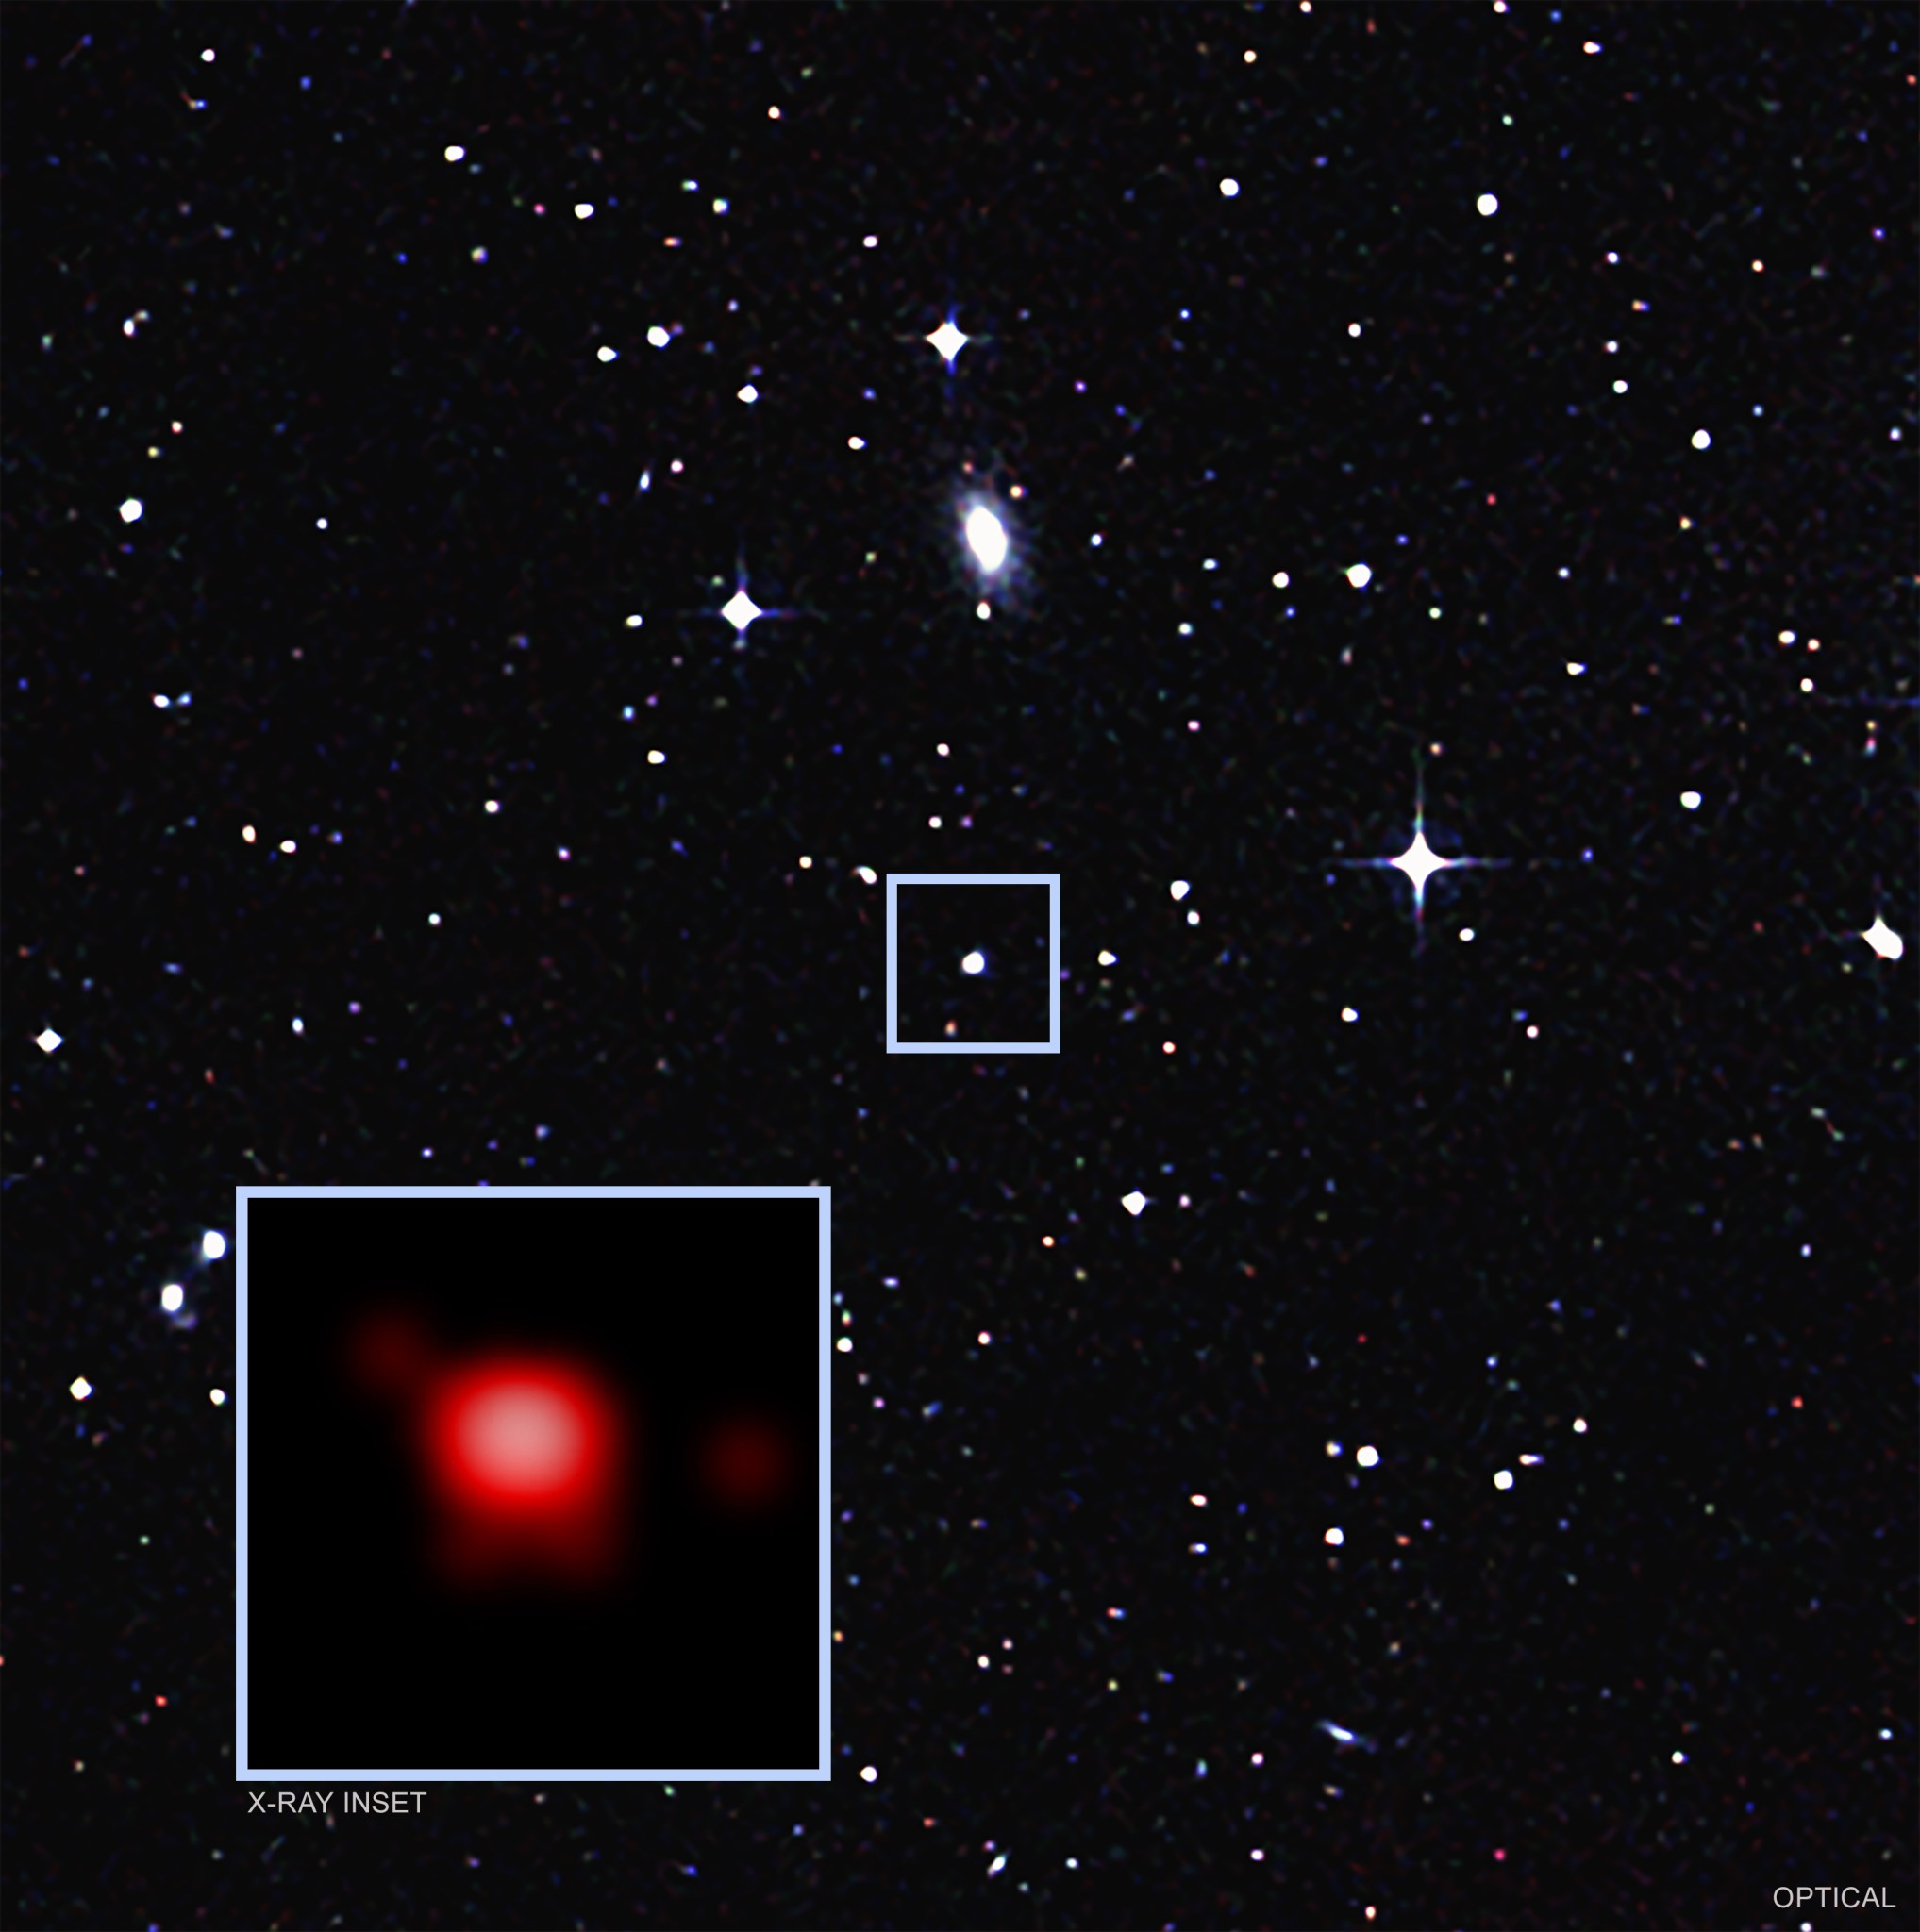 Supermassive black hole at the center of galaxy GSN 069.